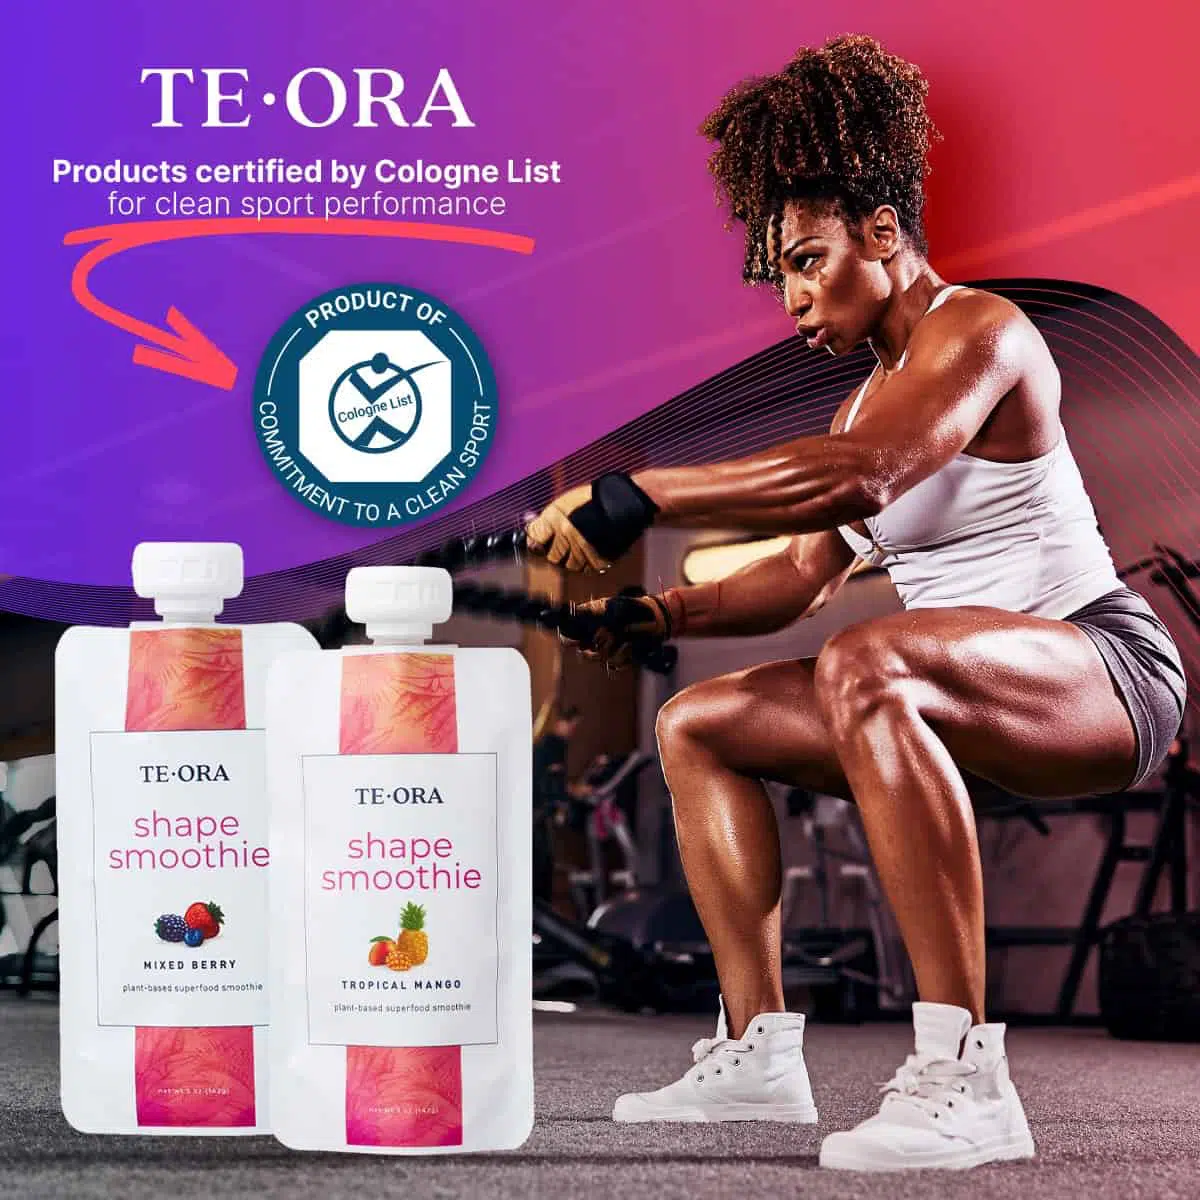 Te-Ora Products Certified by Cologne List